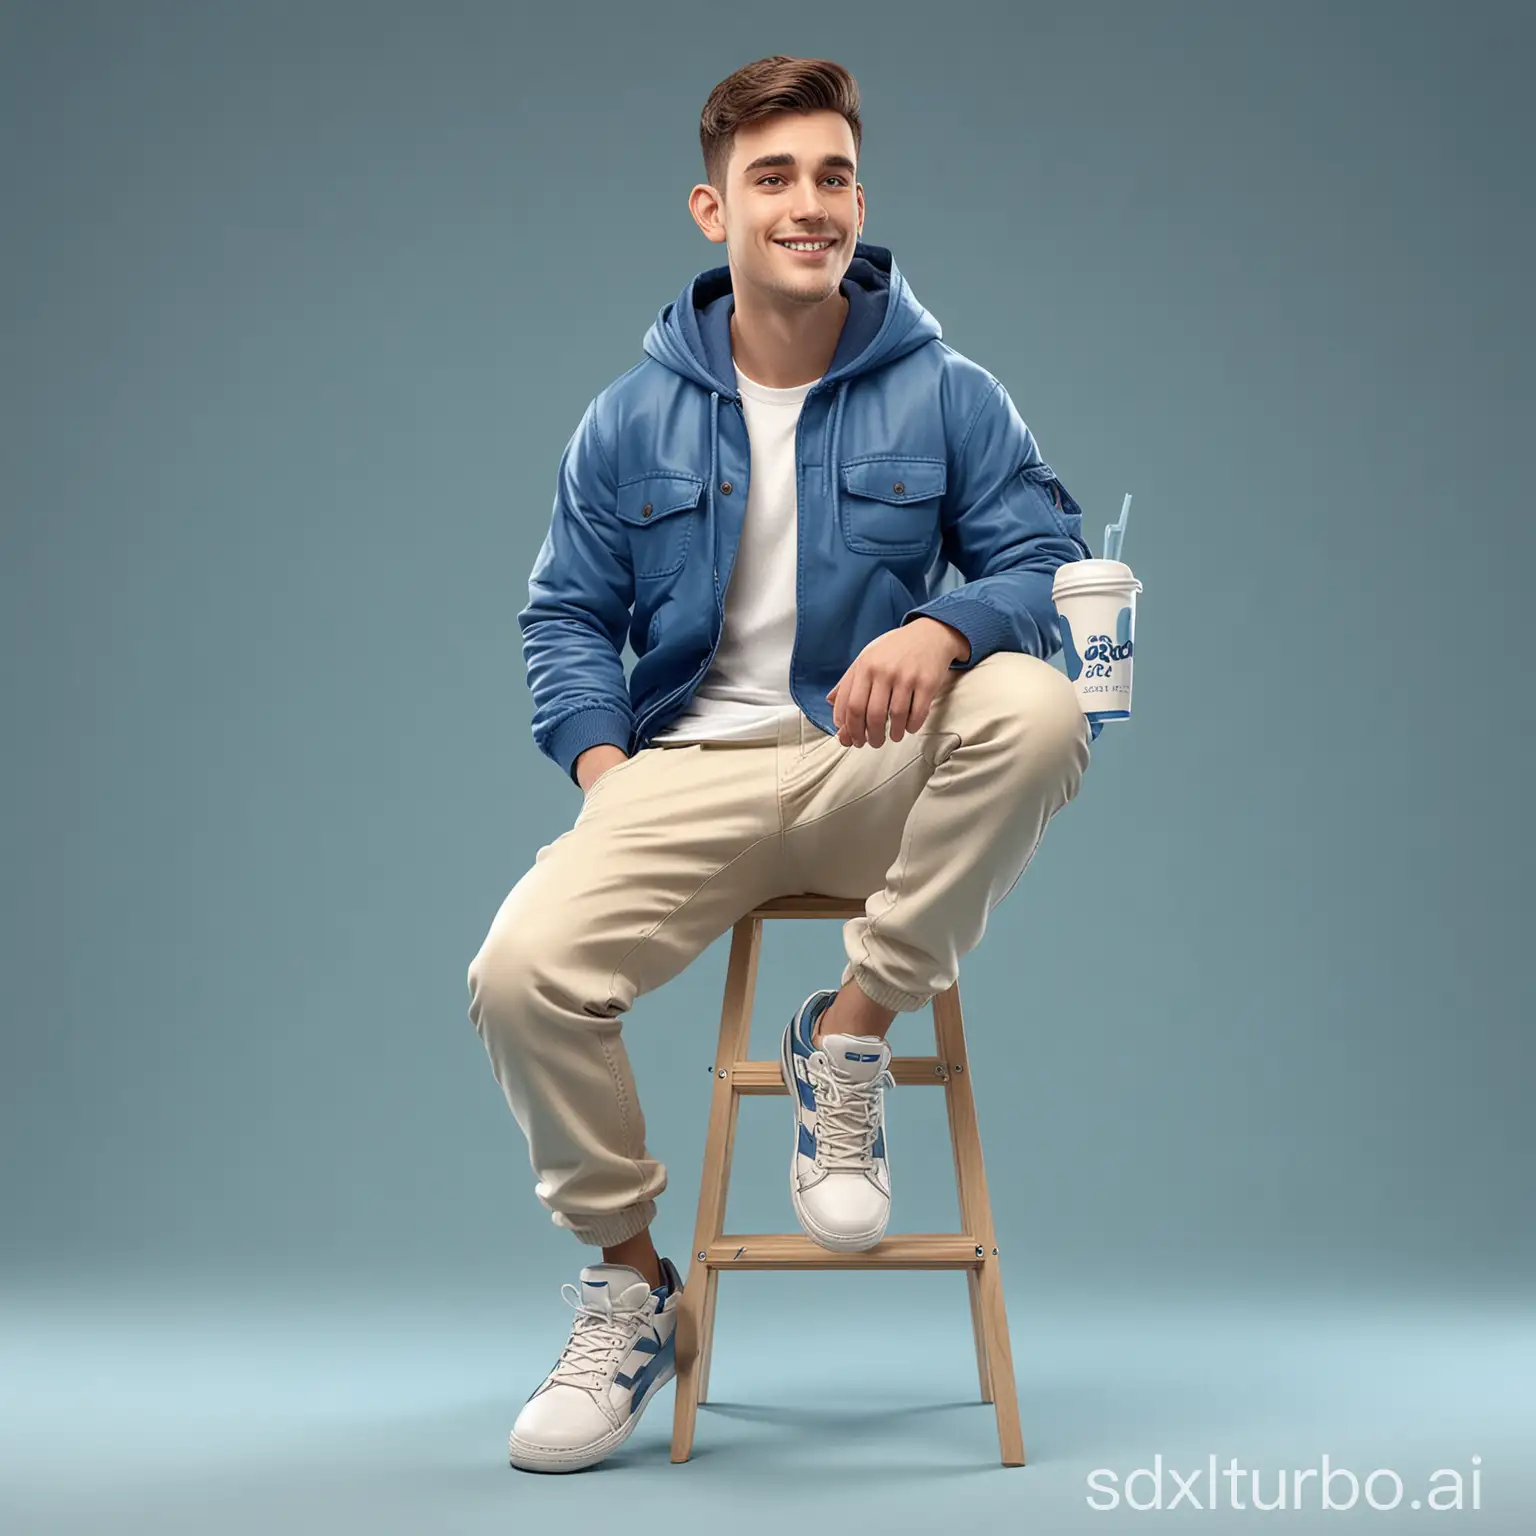 Create a caricature 3D Cartoon style full body with a big head. A 22 year old man is sitting on a ladder with his legs crossed facing the camera. Holding a transparent plastic cup containing a drink in it. Wearing a blue jacket with text on the left chest area, light beige trousers and dark sneakers. Make sure the atmosphere looks relaxed and comfortable to reflect a relaxed moment. Soft gradient blue color background.high quality image, Uhd, Hd, 16k.